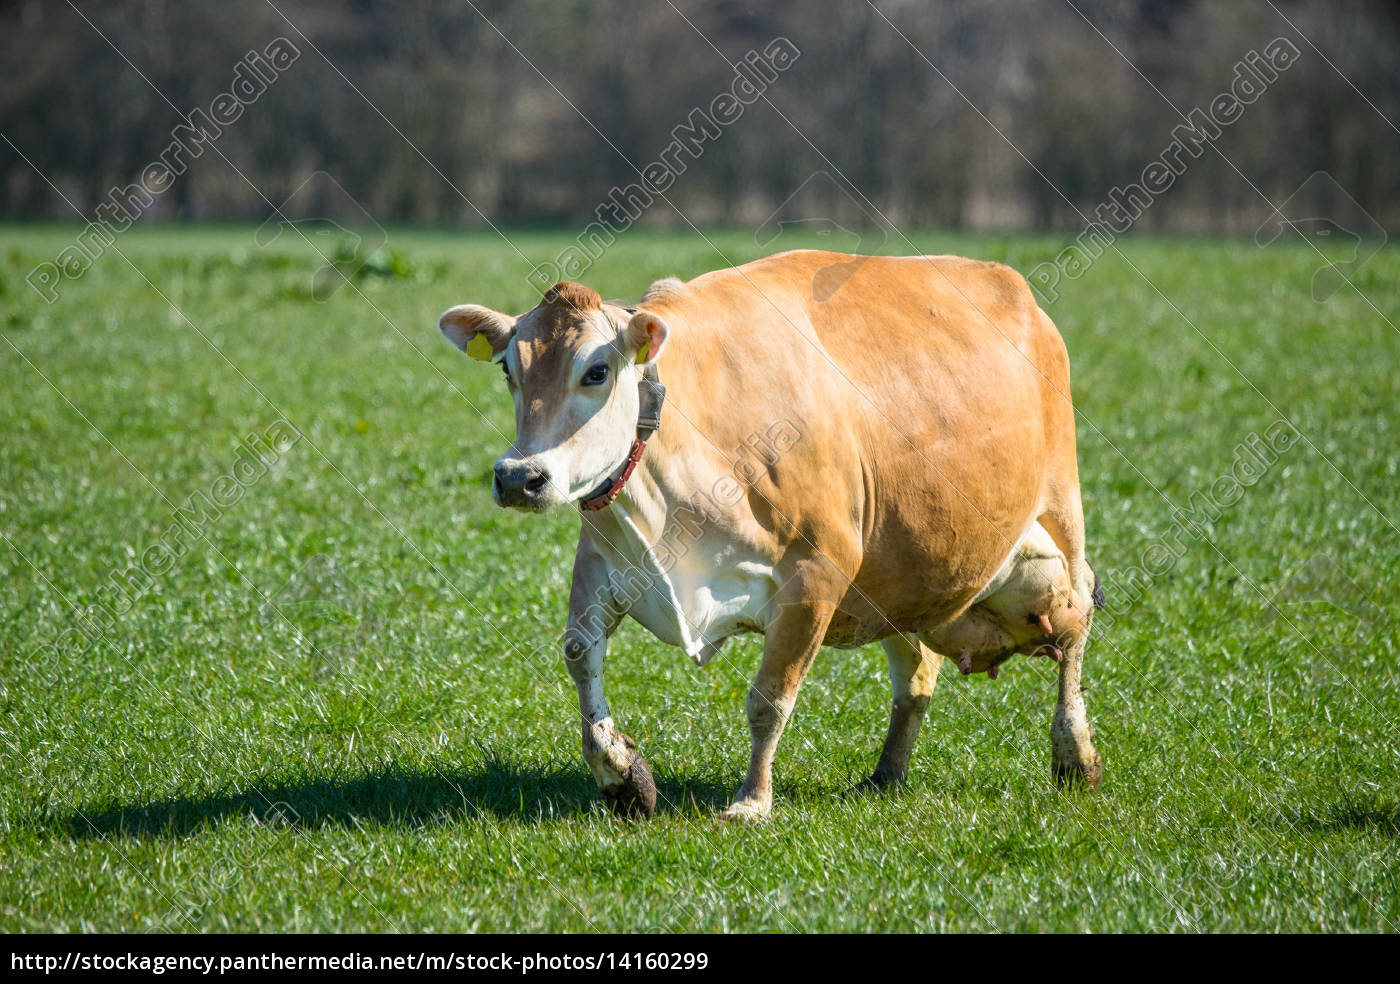 Jersey cow on grass - Stock Photo 